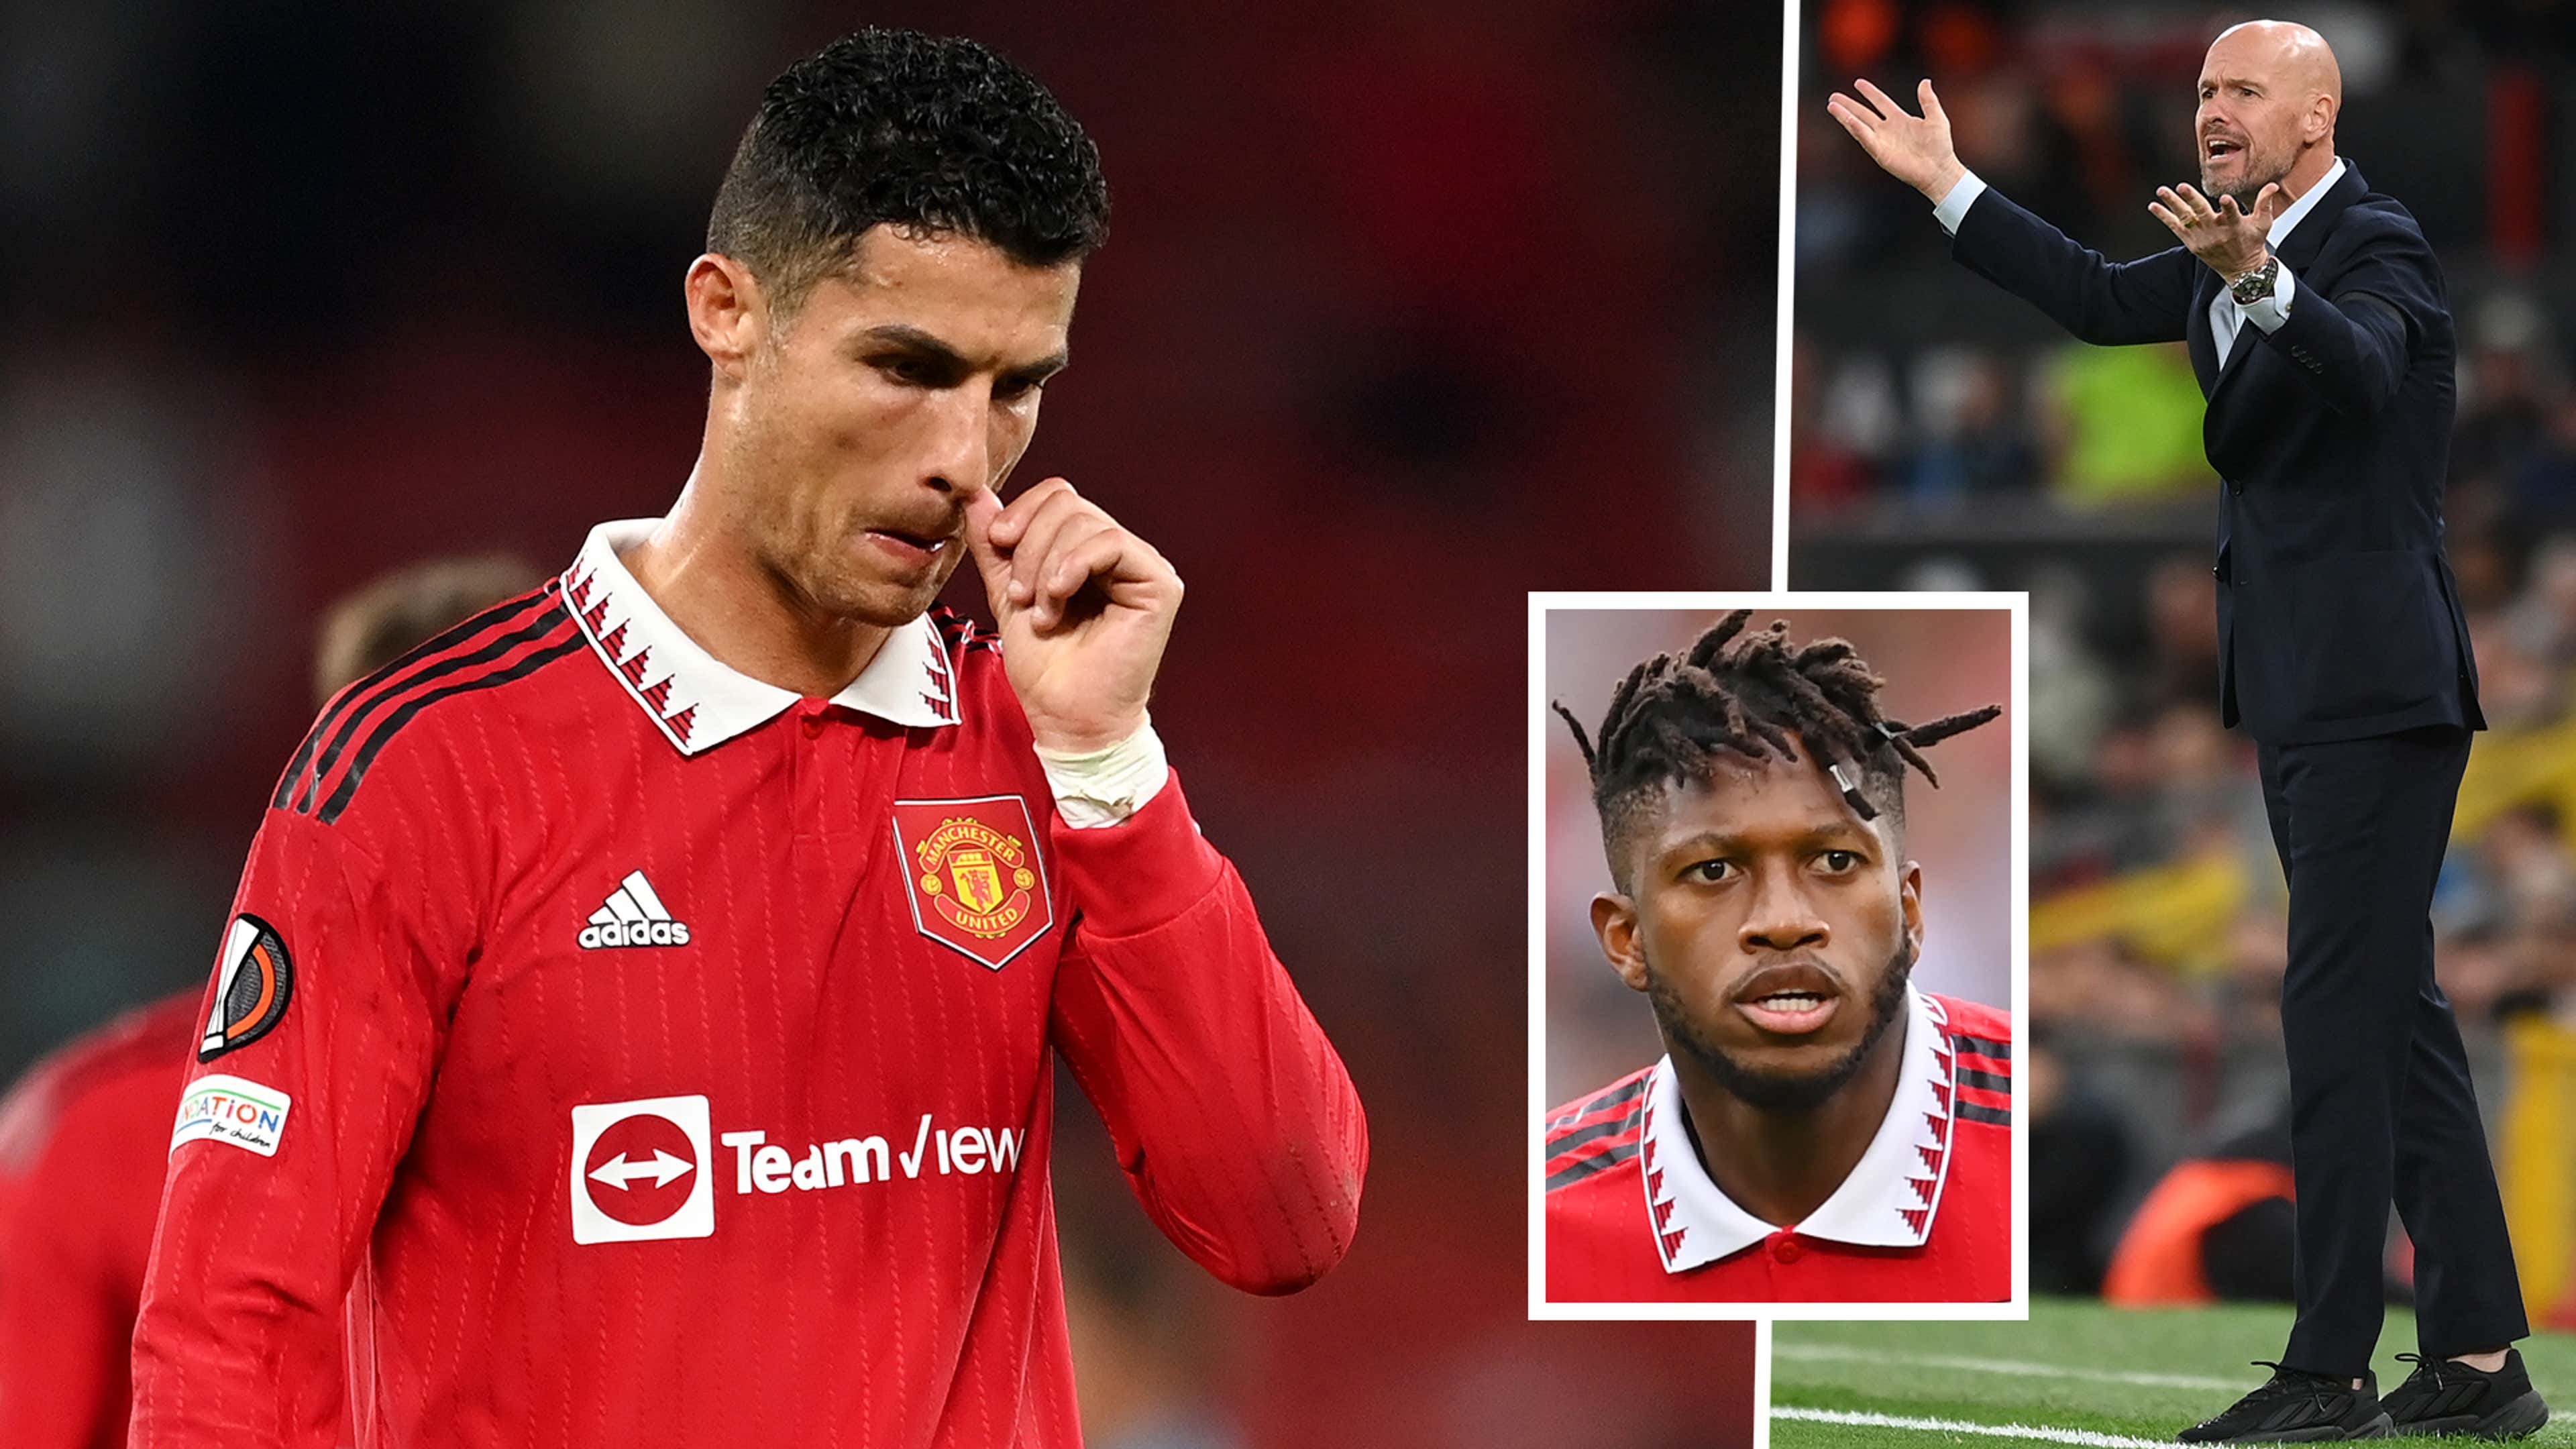 Ronaldo 'still number one' over Messi as Foster says critics of former Man  Utd team-mate are 'completely mad